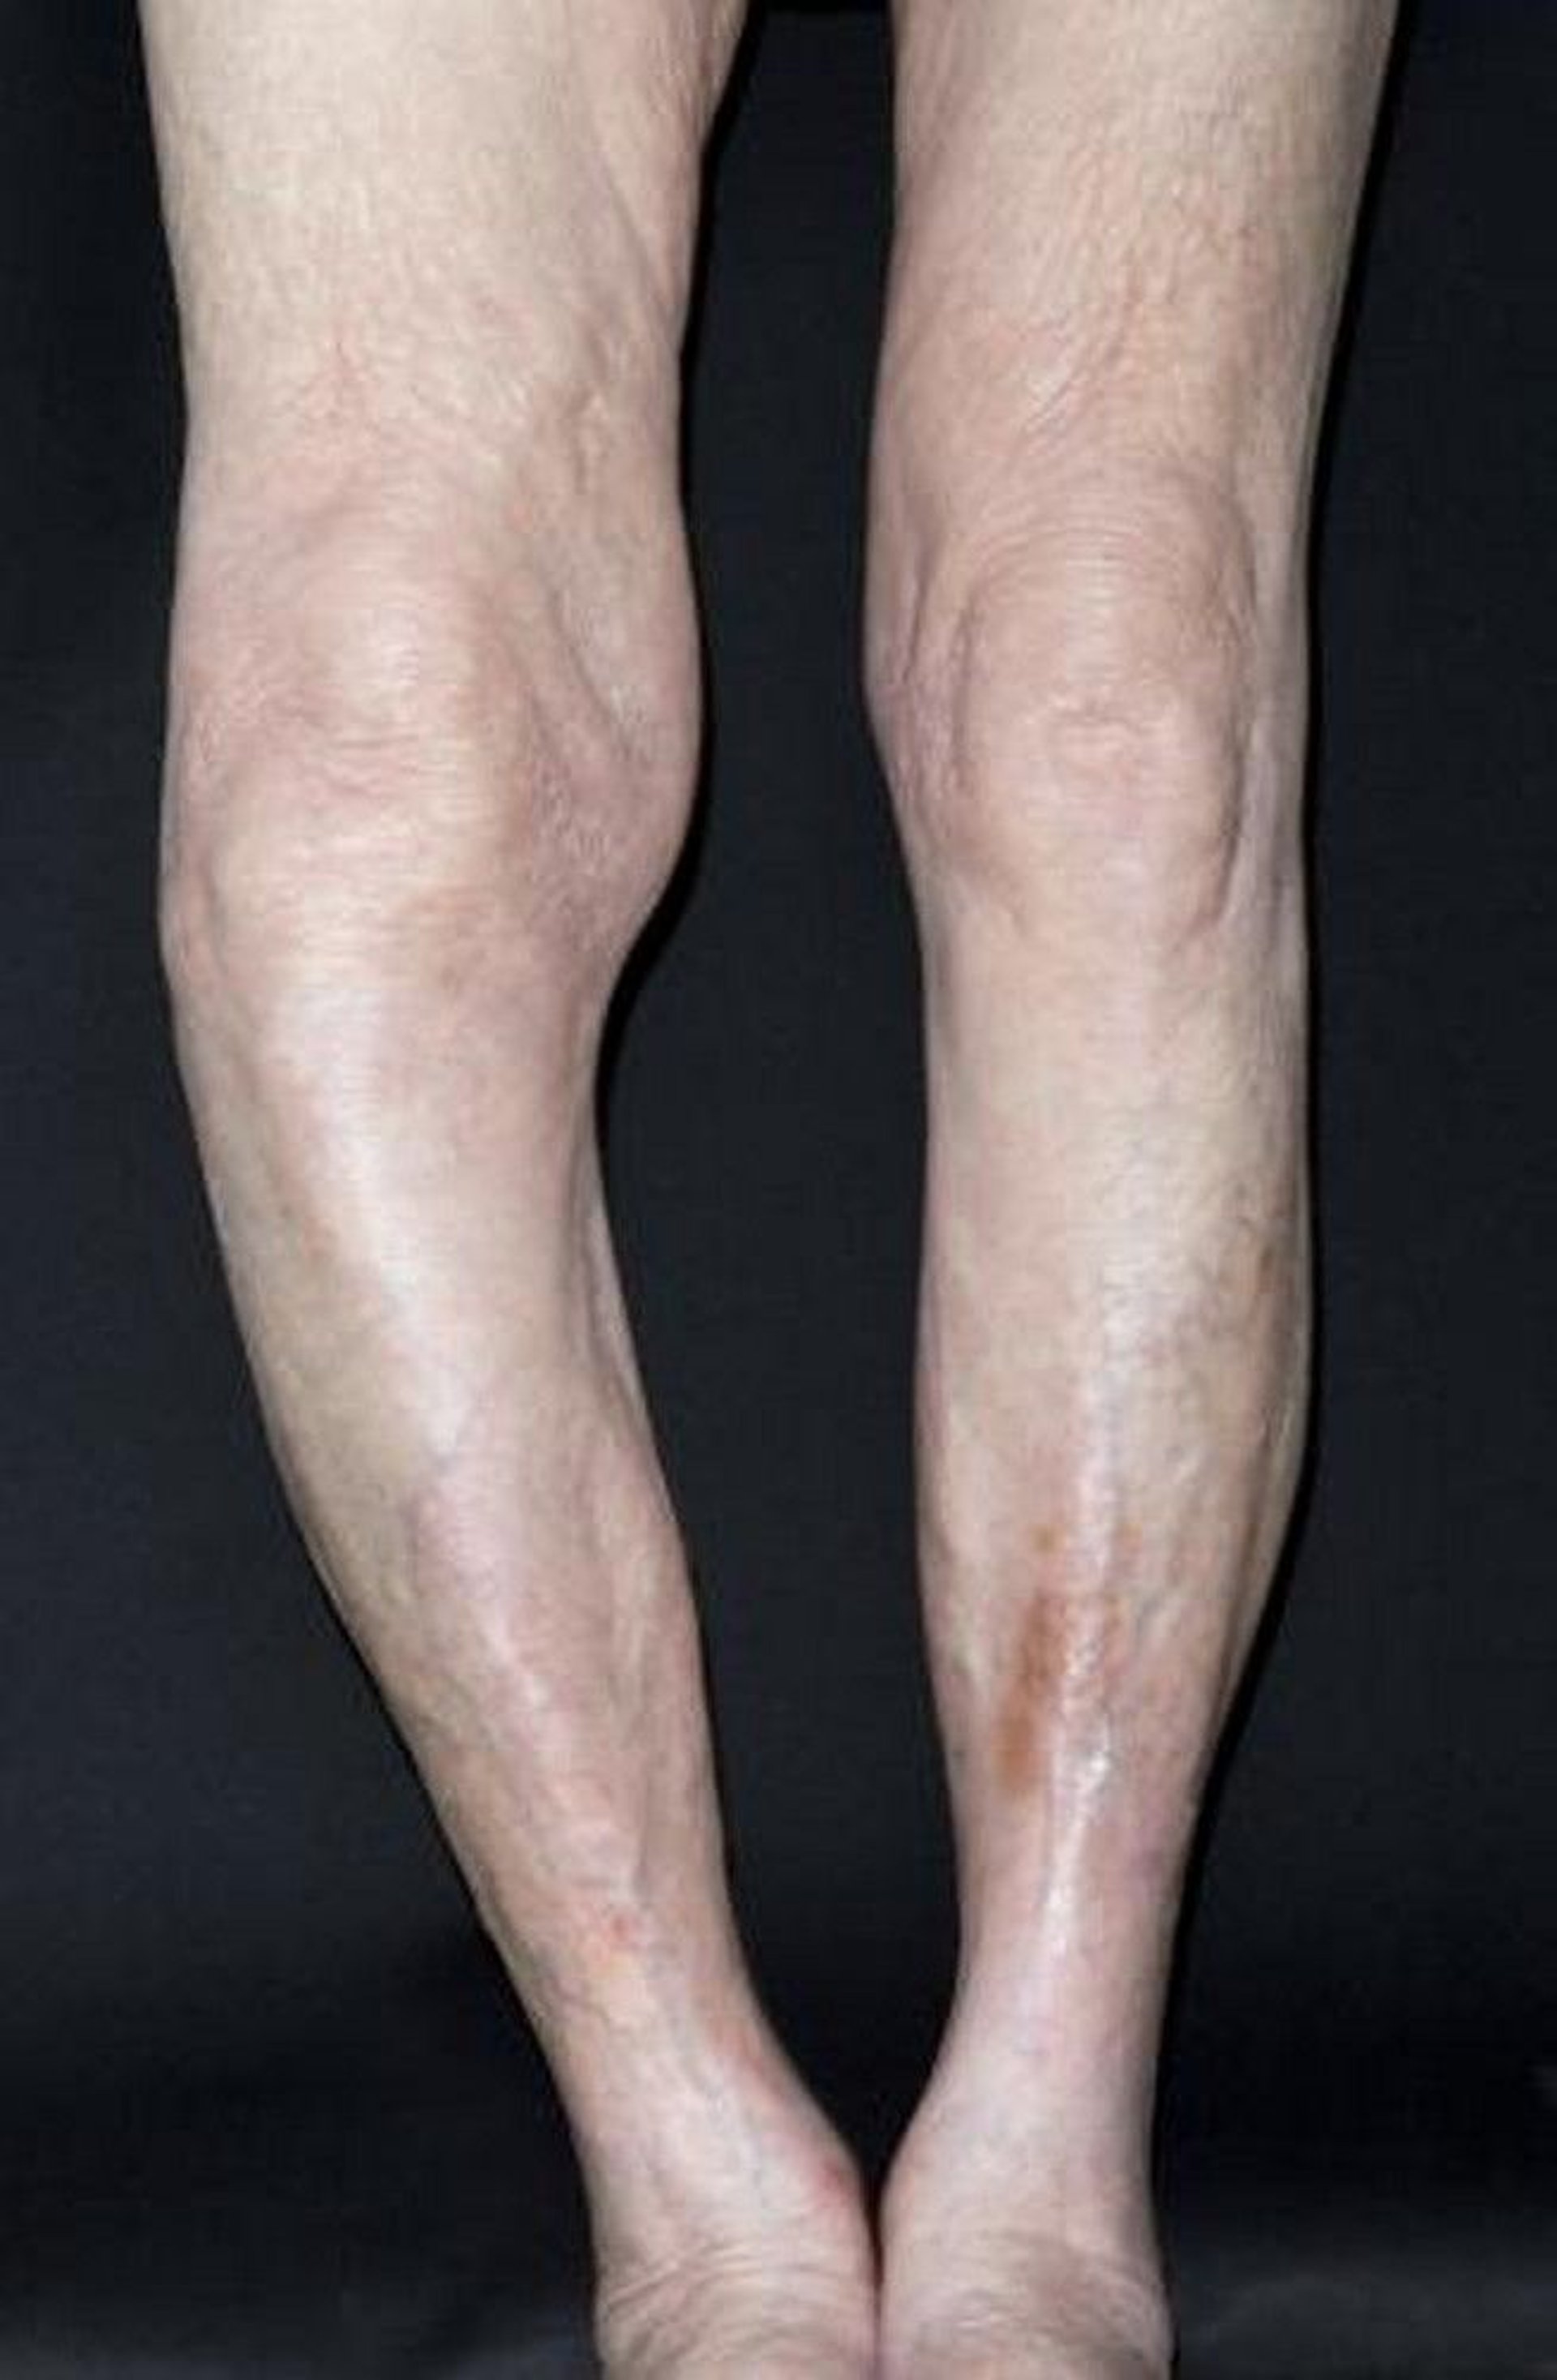 Bowing of the Shinbone in Paget Disease